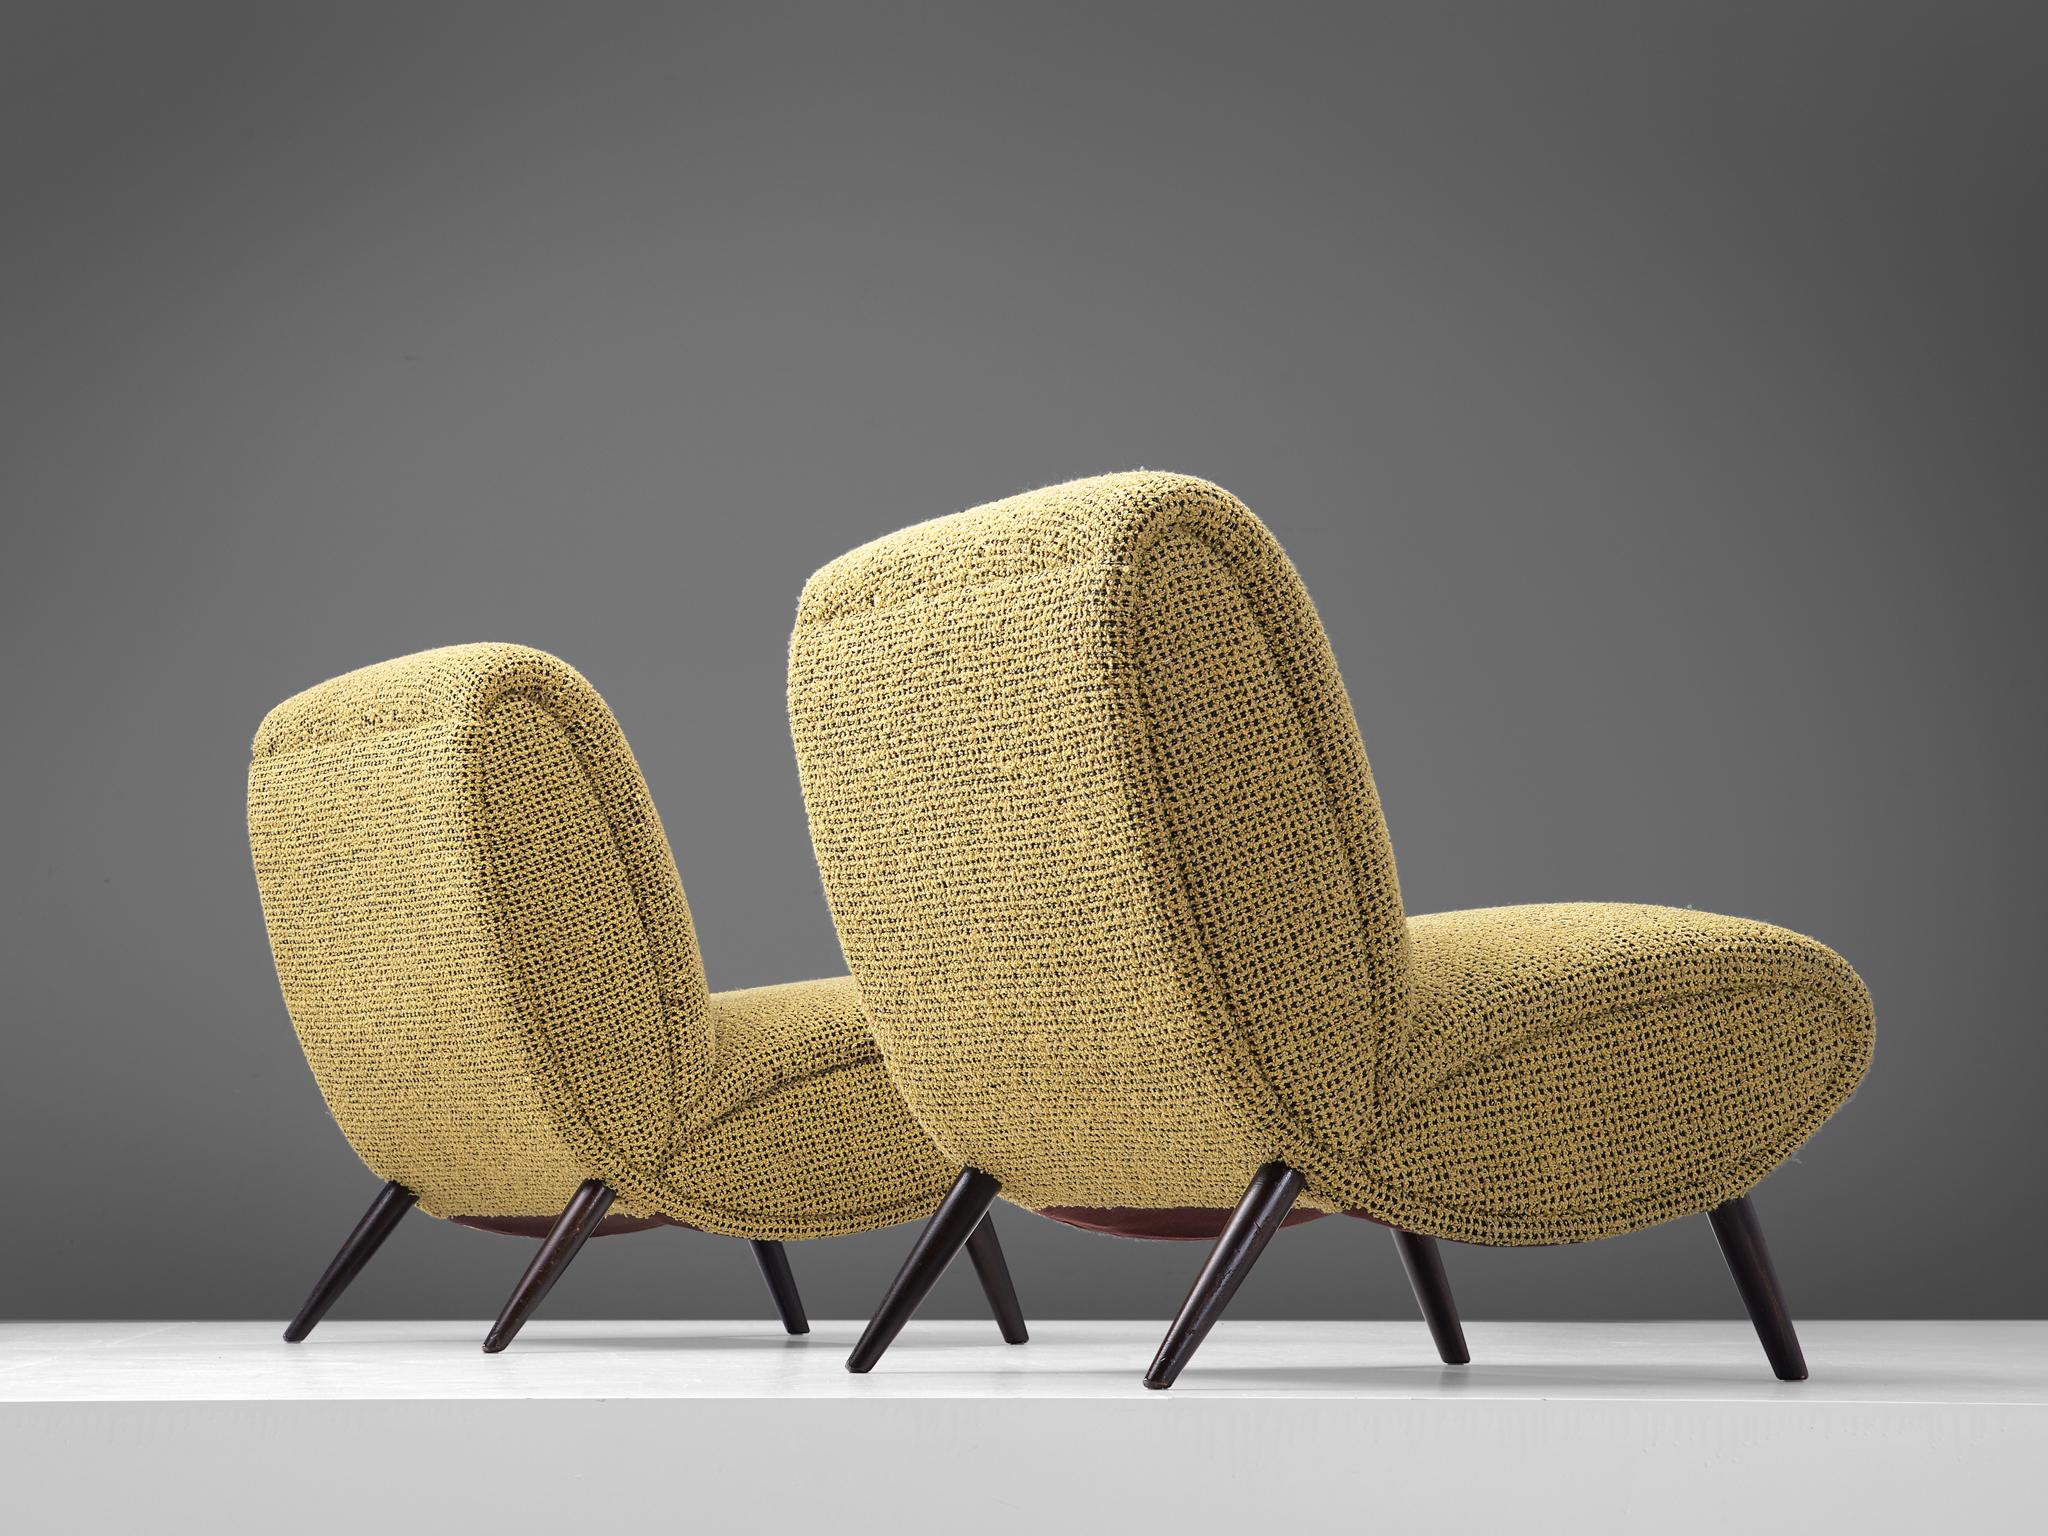 Norman Bel Geddes, set of two slipper chairs, fabric and beech, United States, 1949.

Set of two easy chairs designed by the American Industrial designer Norman Bel Geddes (1893-1958). In his book 'Horizons' (1932) he describes his design